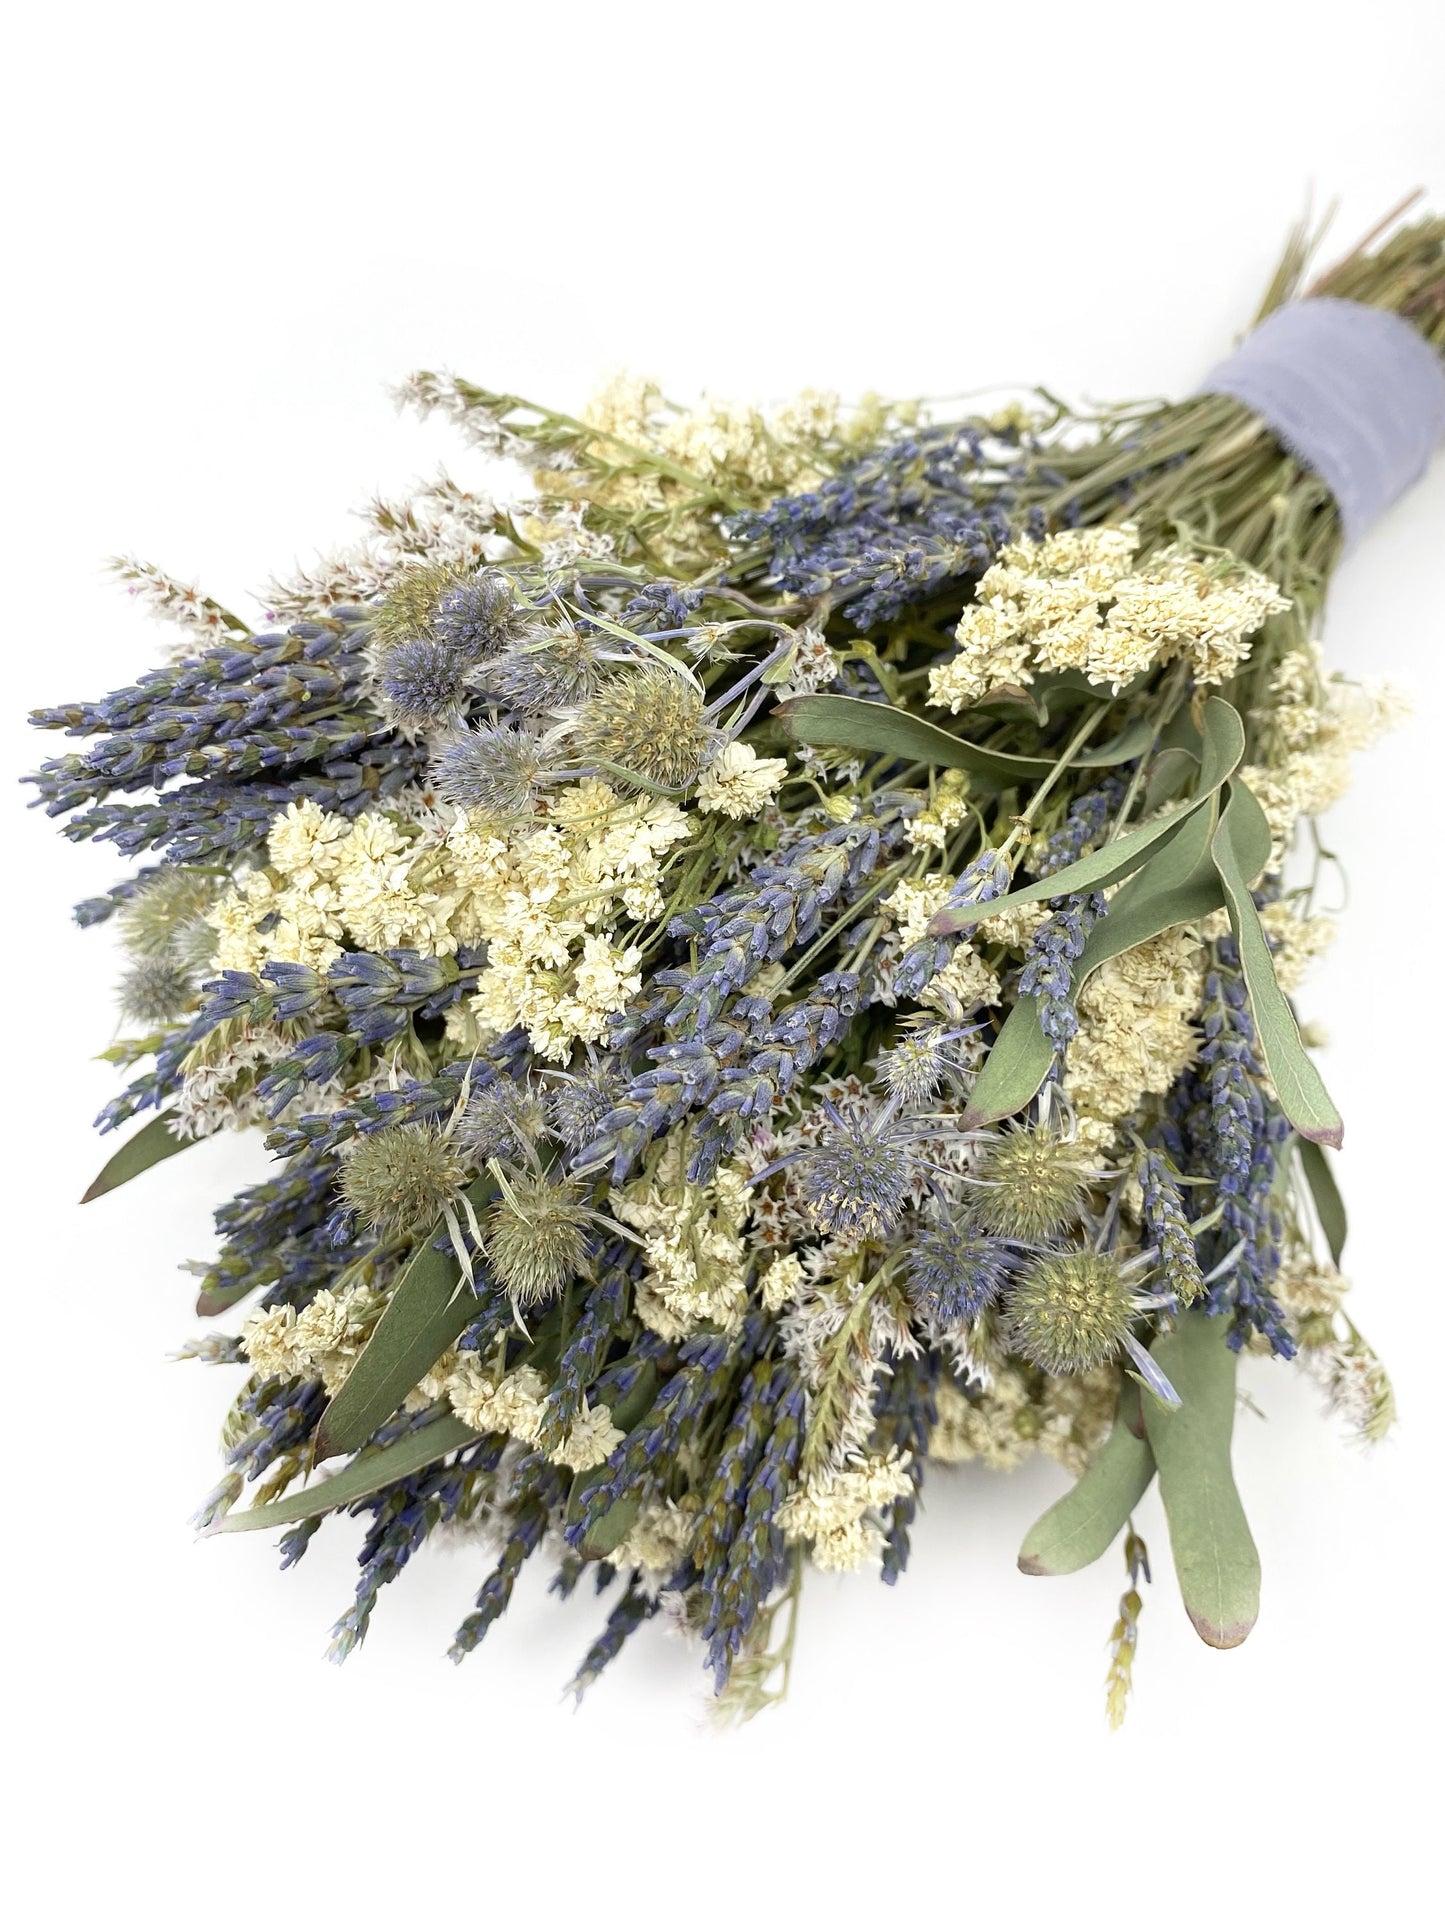 Wedding Bouquet, Dried Flowers, Preserved Floral, Bridal, Natural, Lavender, Bridesmaid, White and Blue, Greenery, Simple, Gift